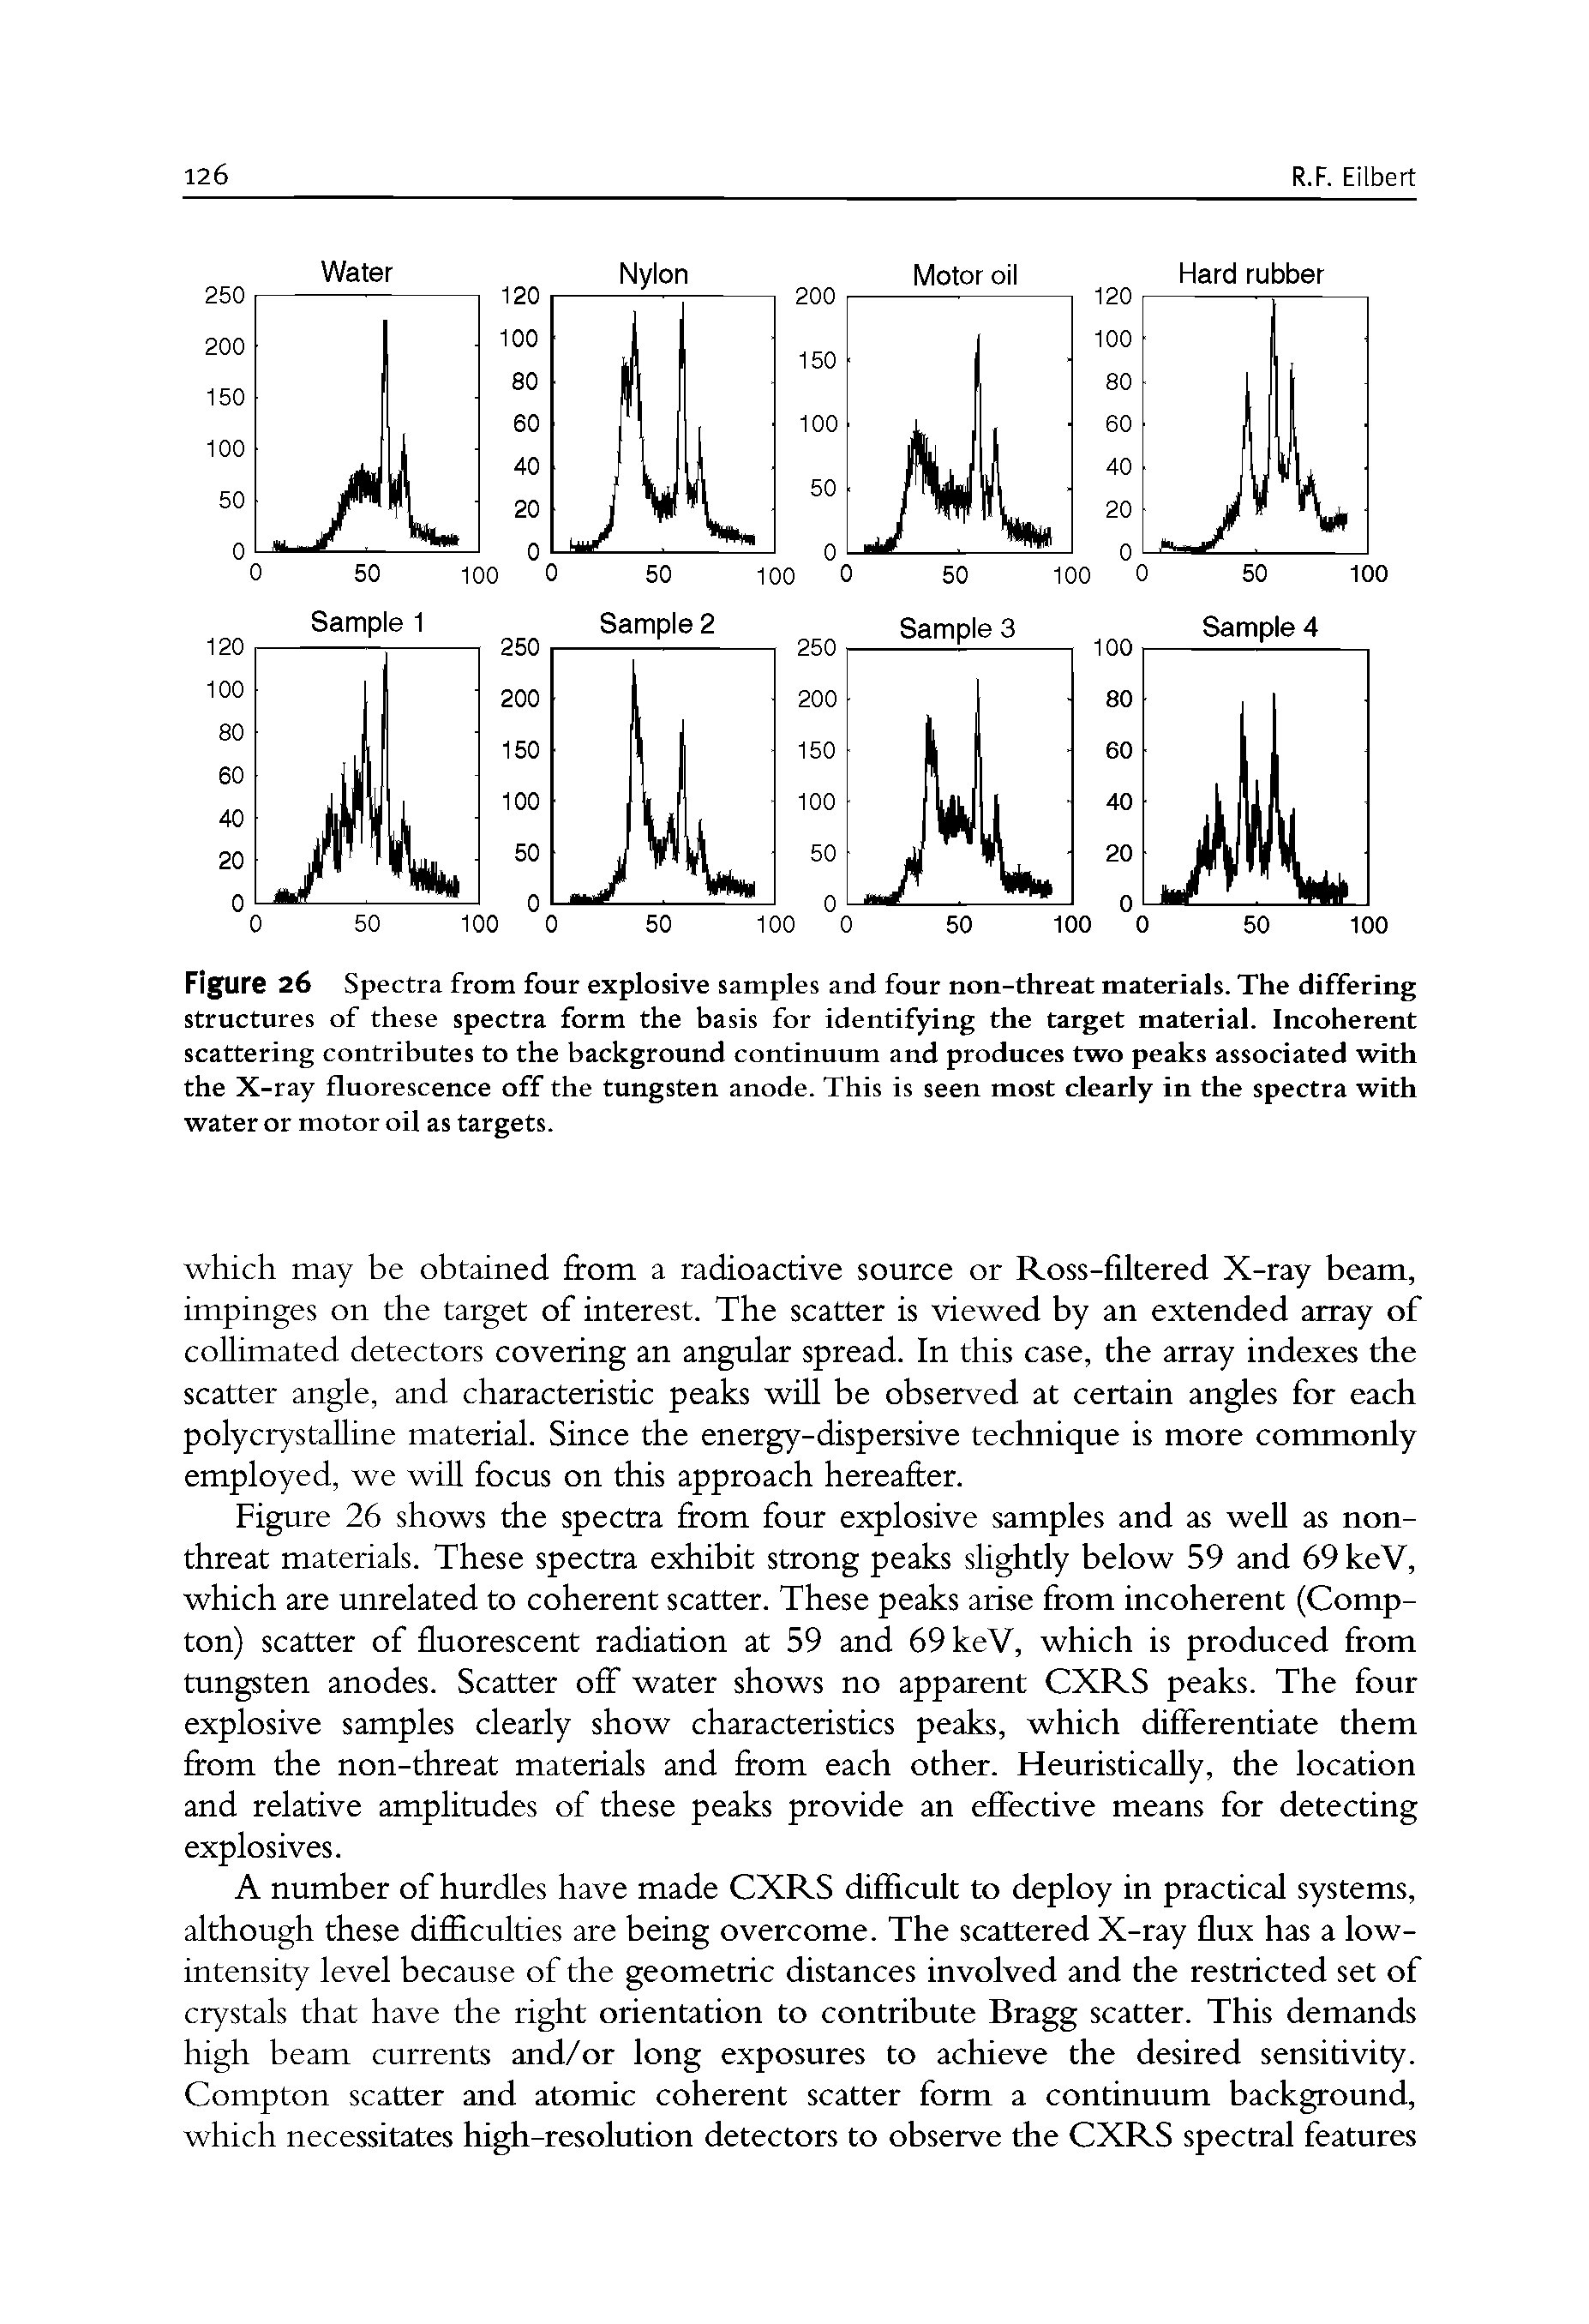 Figure 26 Spectra from four explosive samples and four non-threat materials. The differing structures of these spectra form the basis for identifying the target material. Incoherent scattering contributes to the background continuum and produces two peaks associated with the X-ray fluorescence off the tungsten anode. This is seen most clearly in the spectra with water or motor oil as targets.